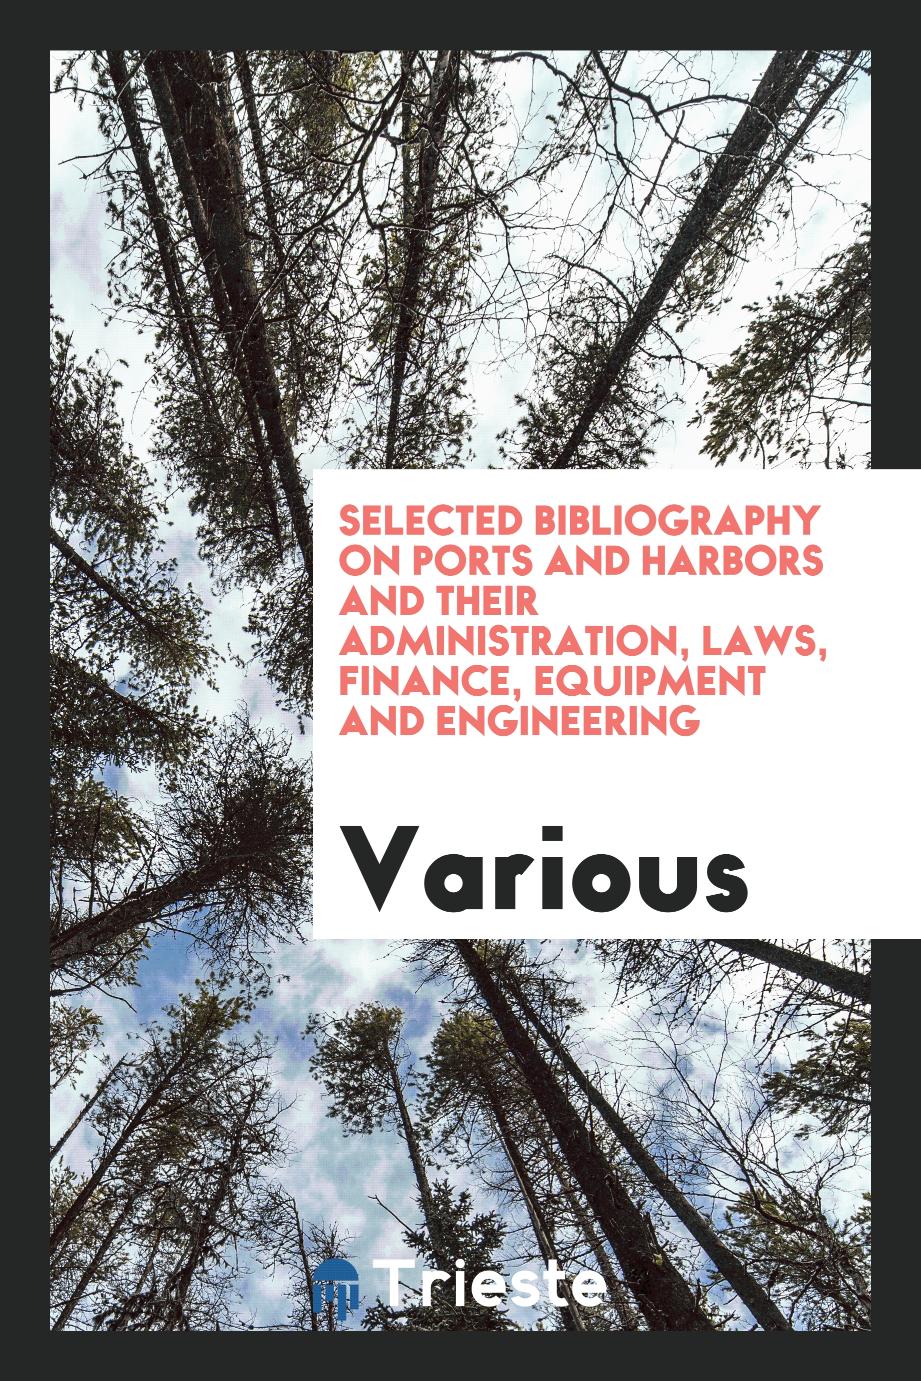 Selected Bibliography on Ports and Harbors and Their Administration, Laws, Finance, Equipment and Engineering